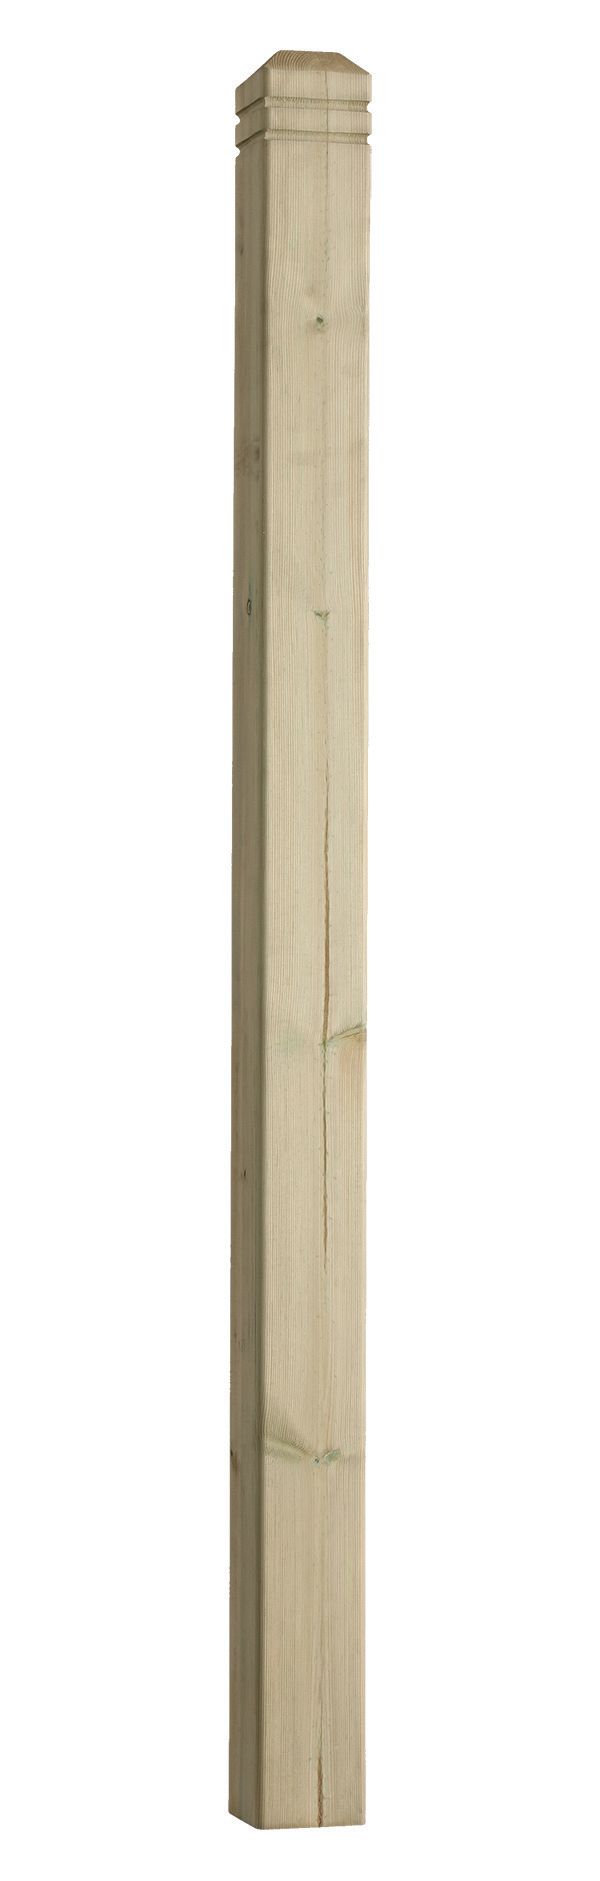 Image of Wickes Chamfered & Beaded Deck Post 82 x 82 x 1200mm